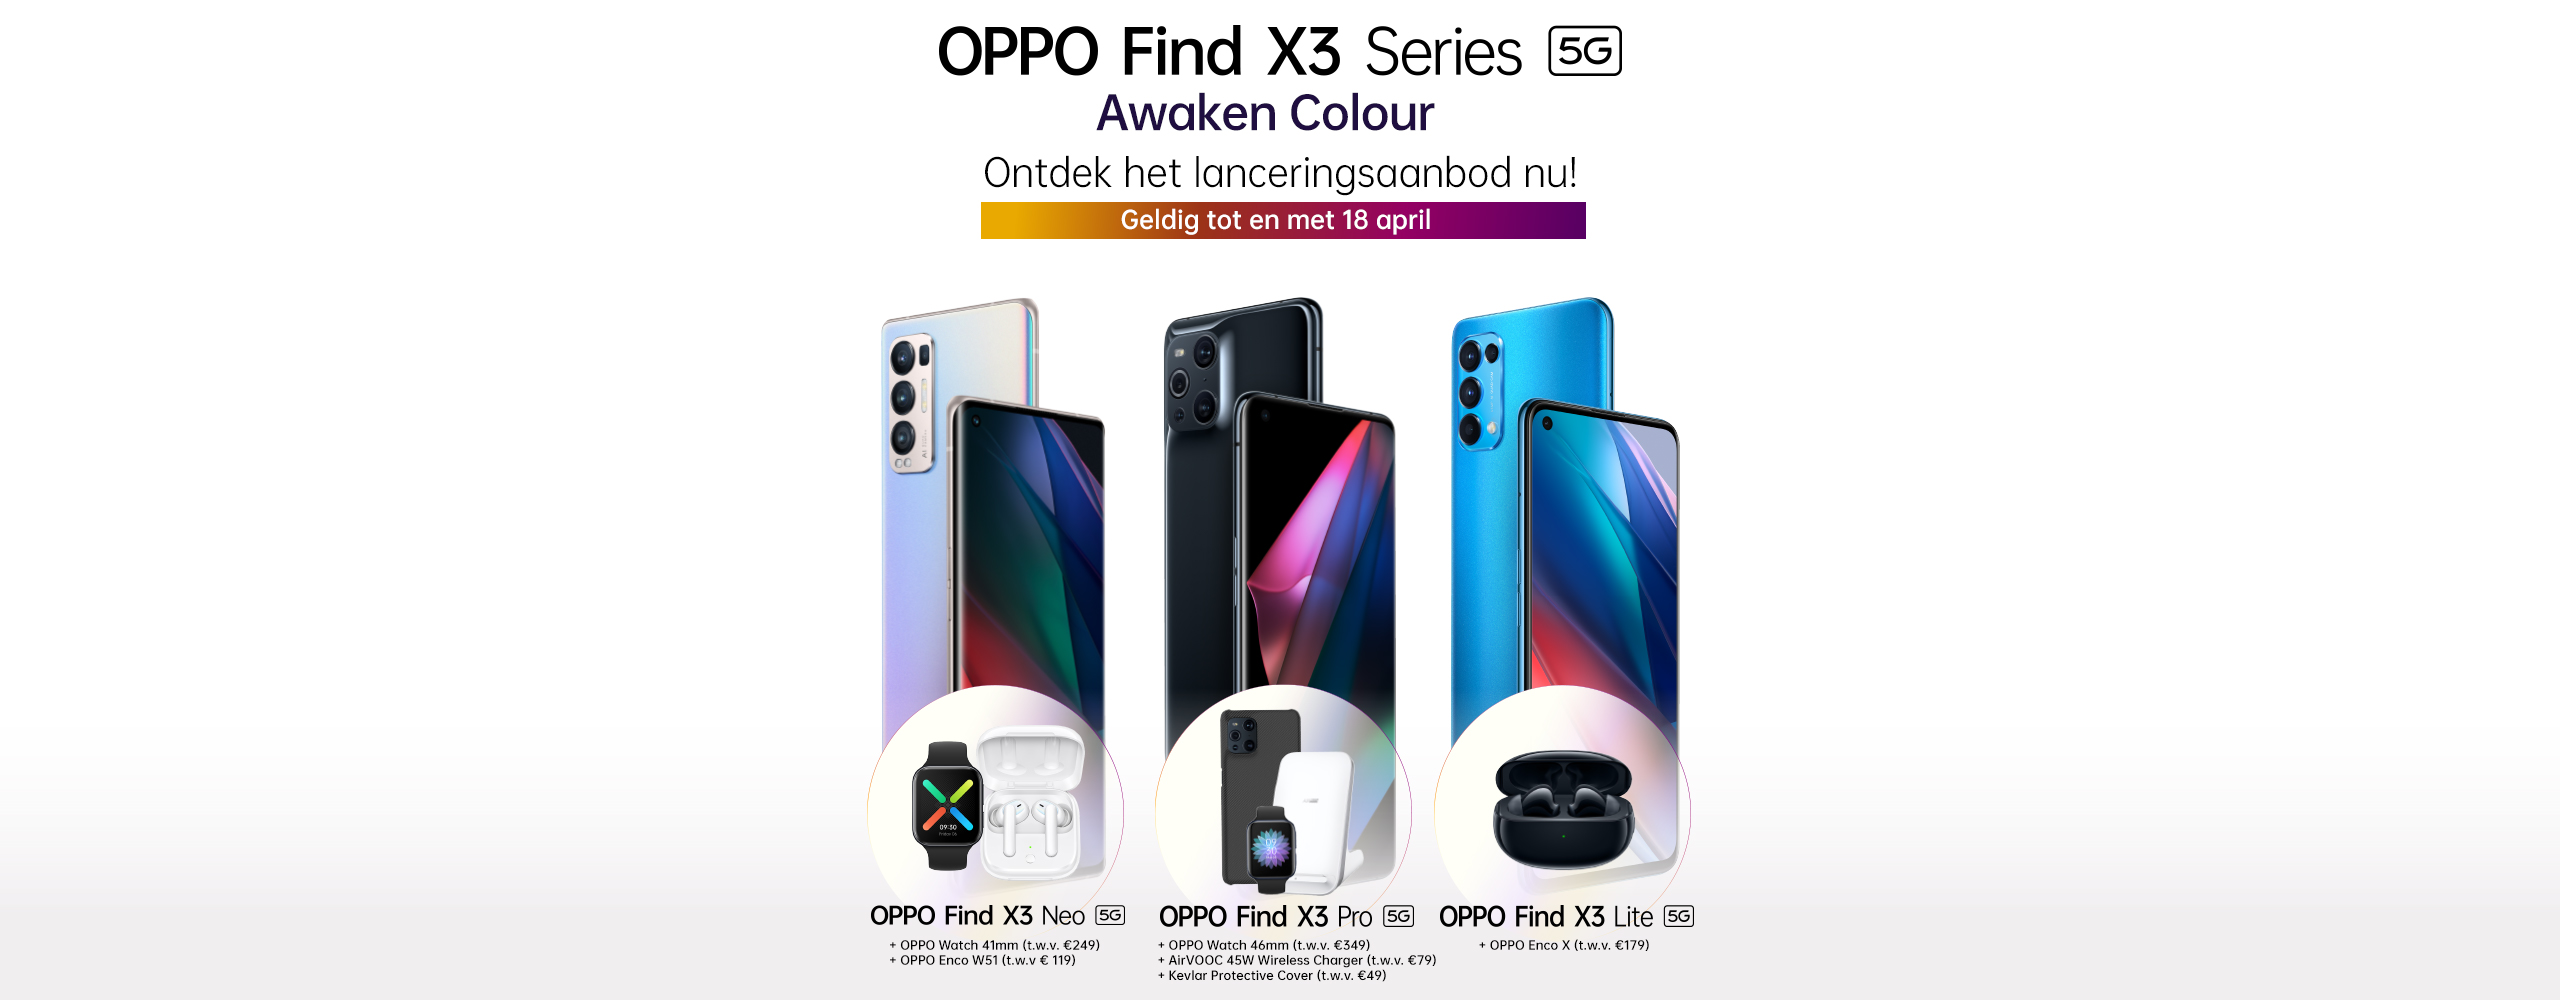 OPPO Find X3 Series 5G - Launch Offer